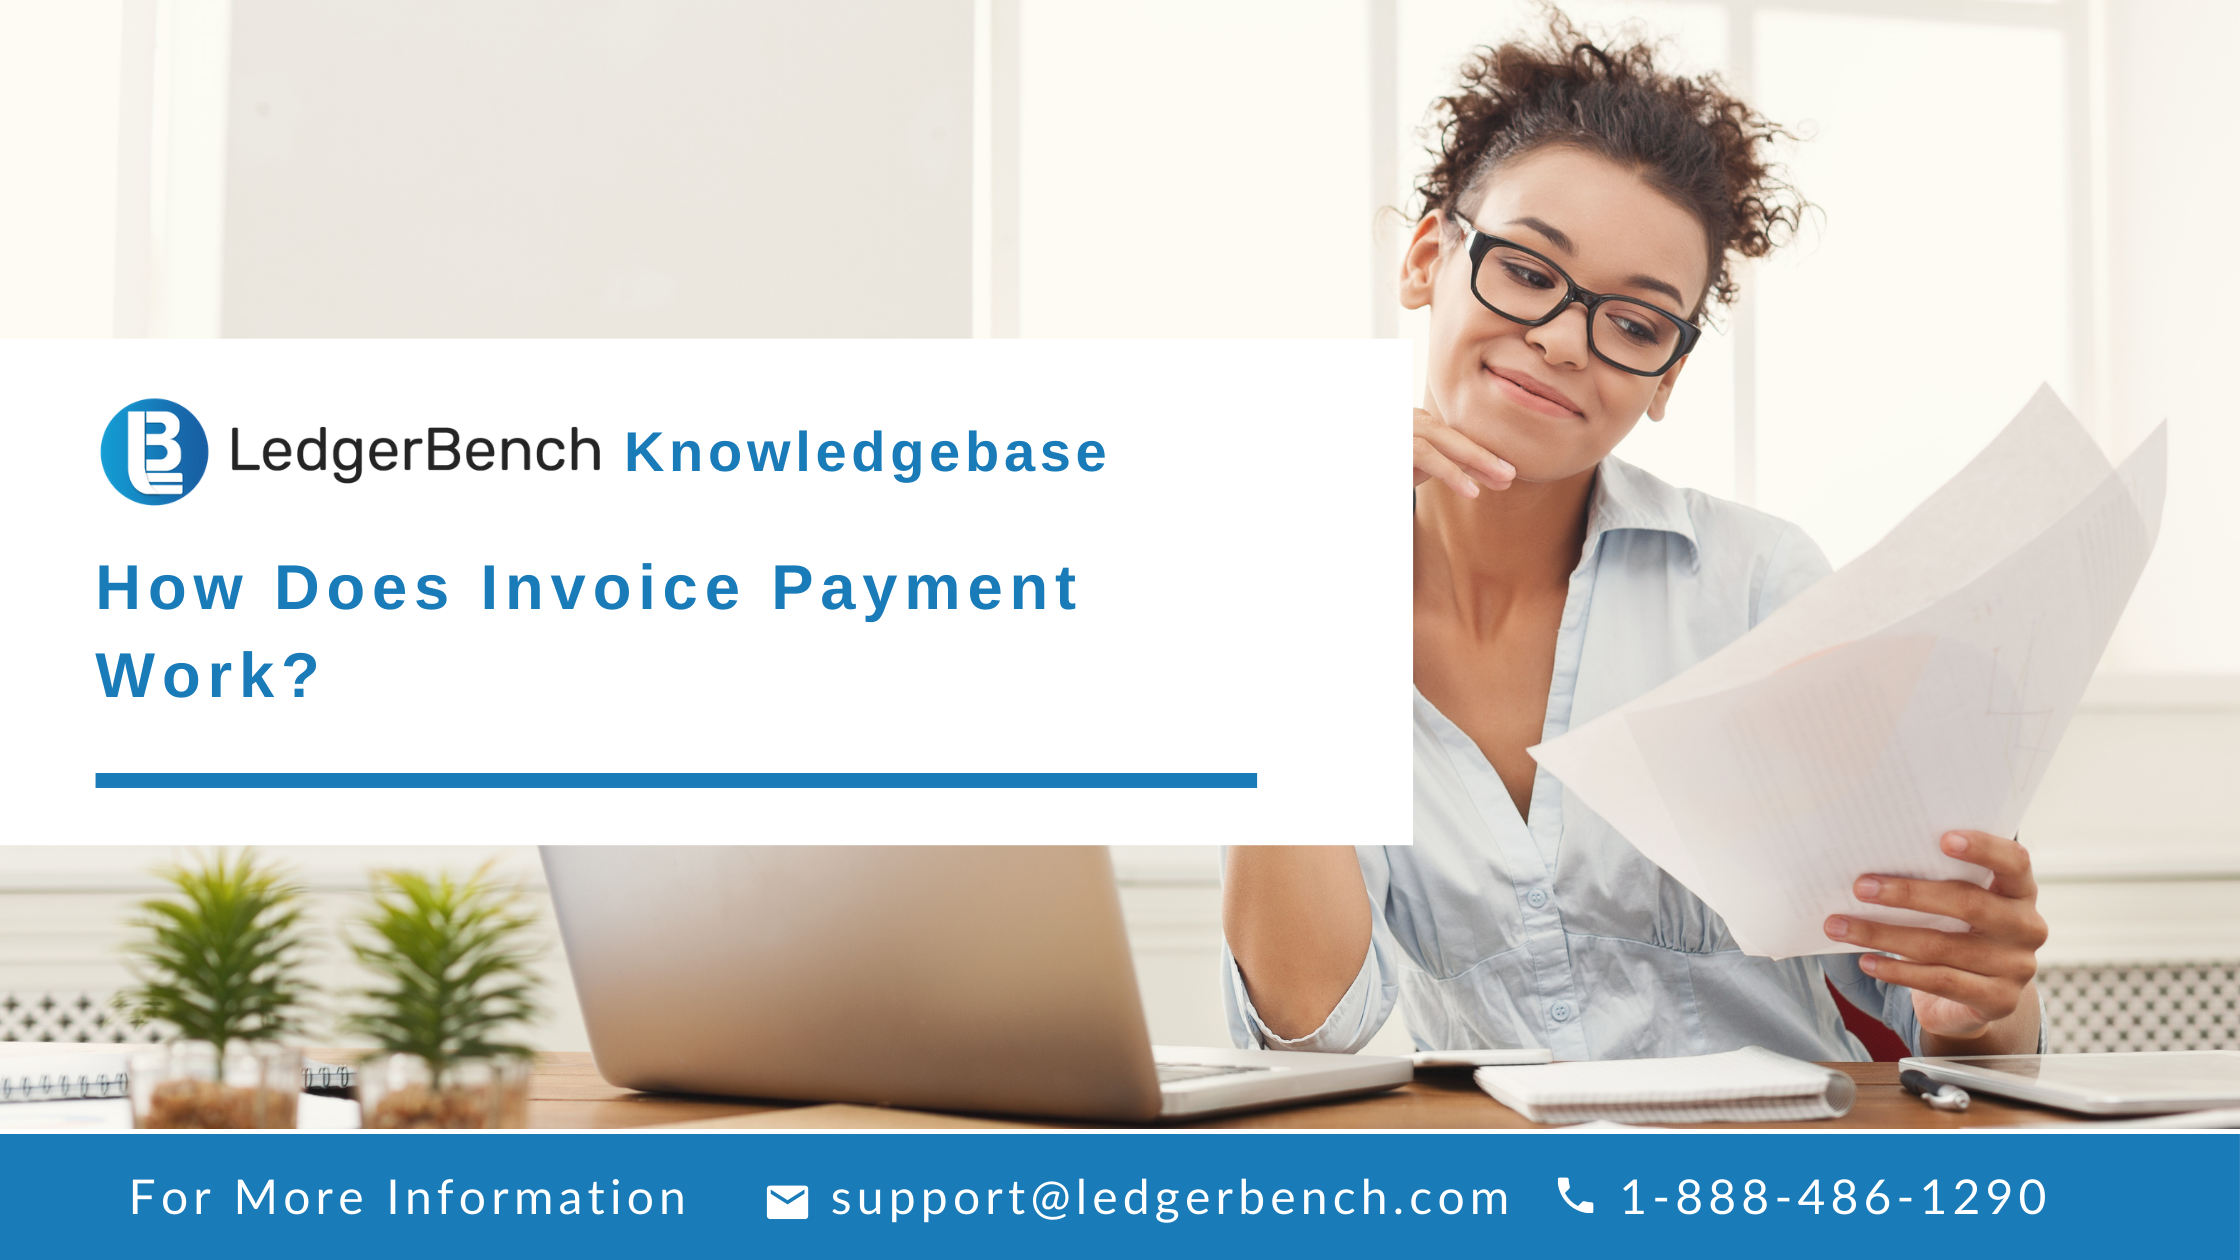 How Does Invoice Payment Work